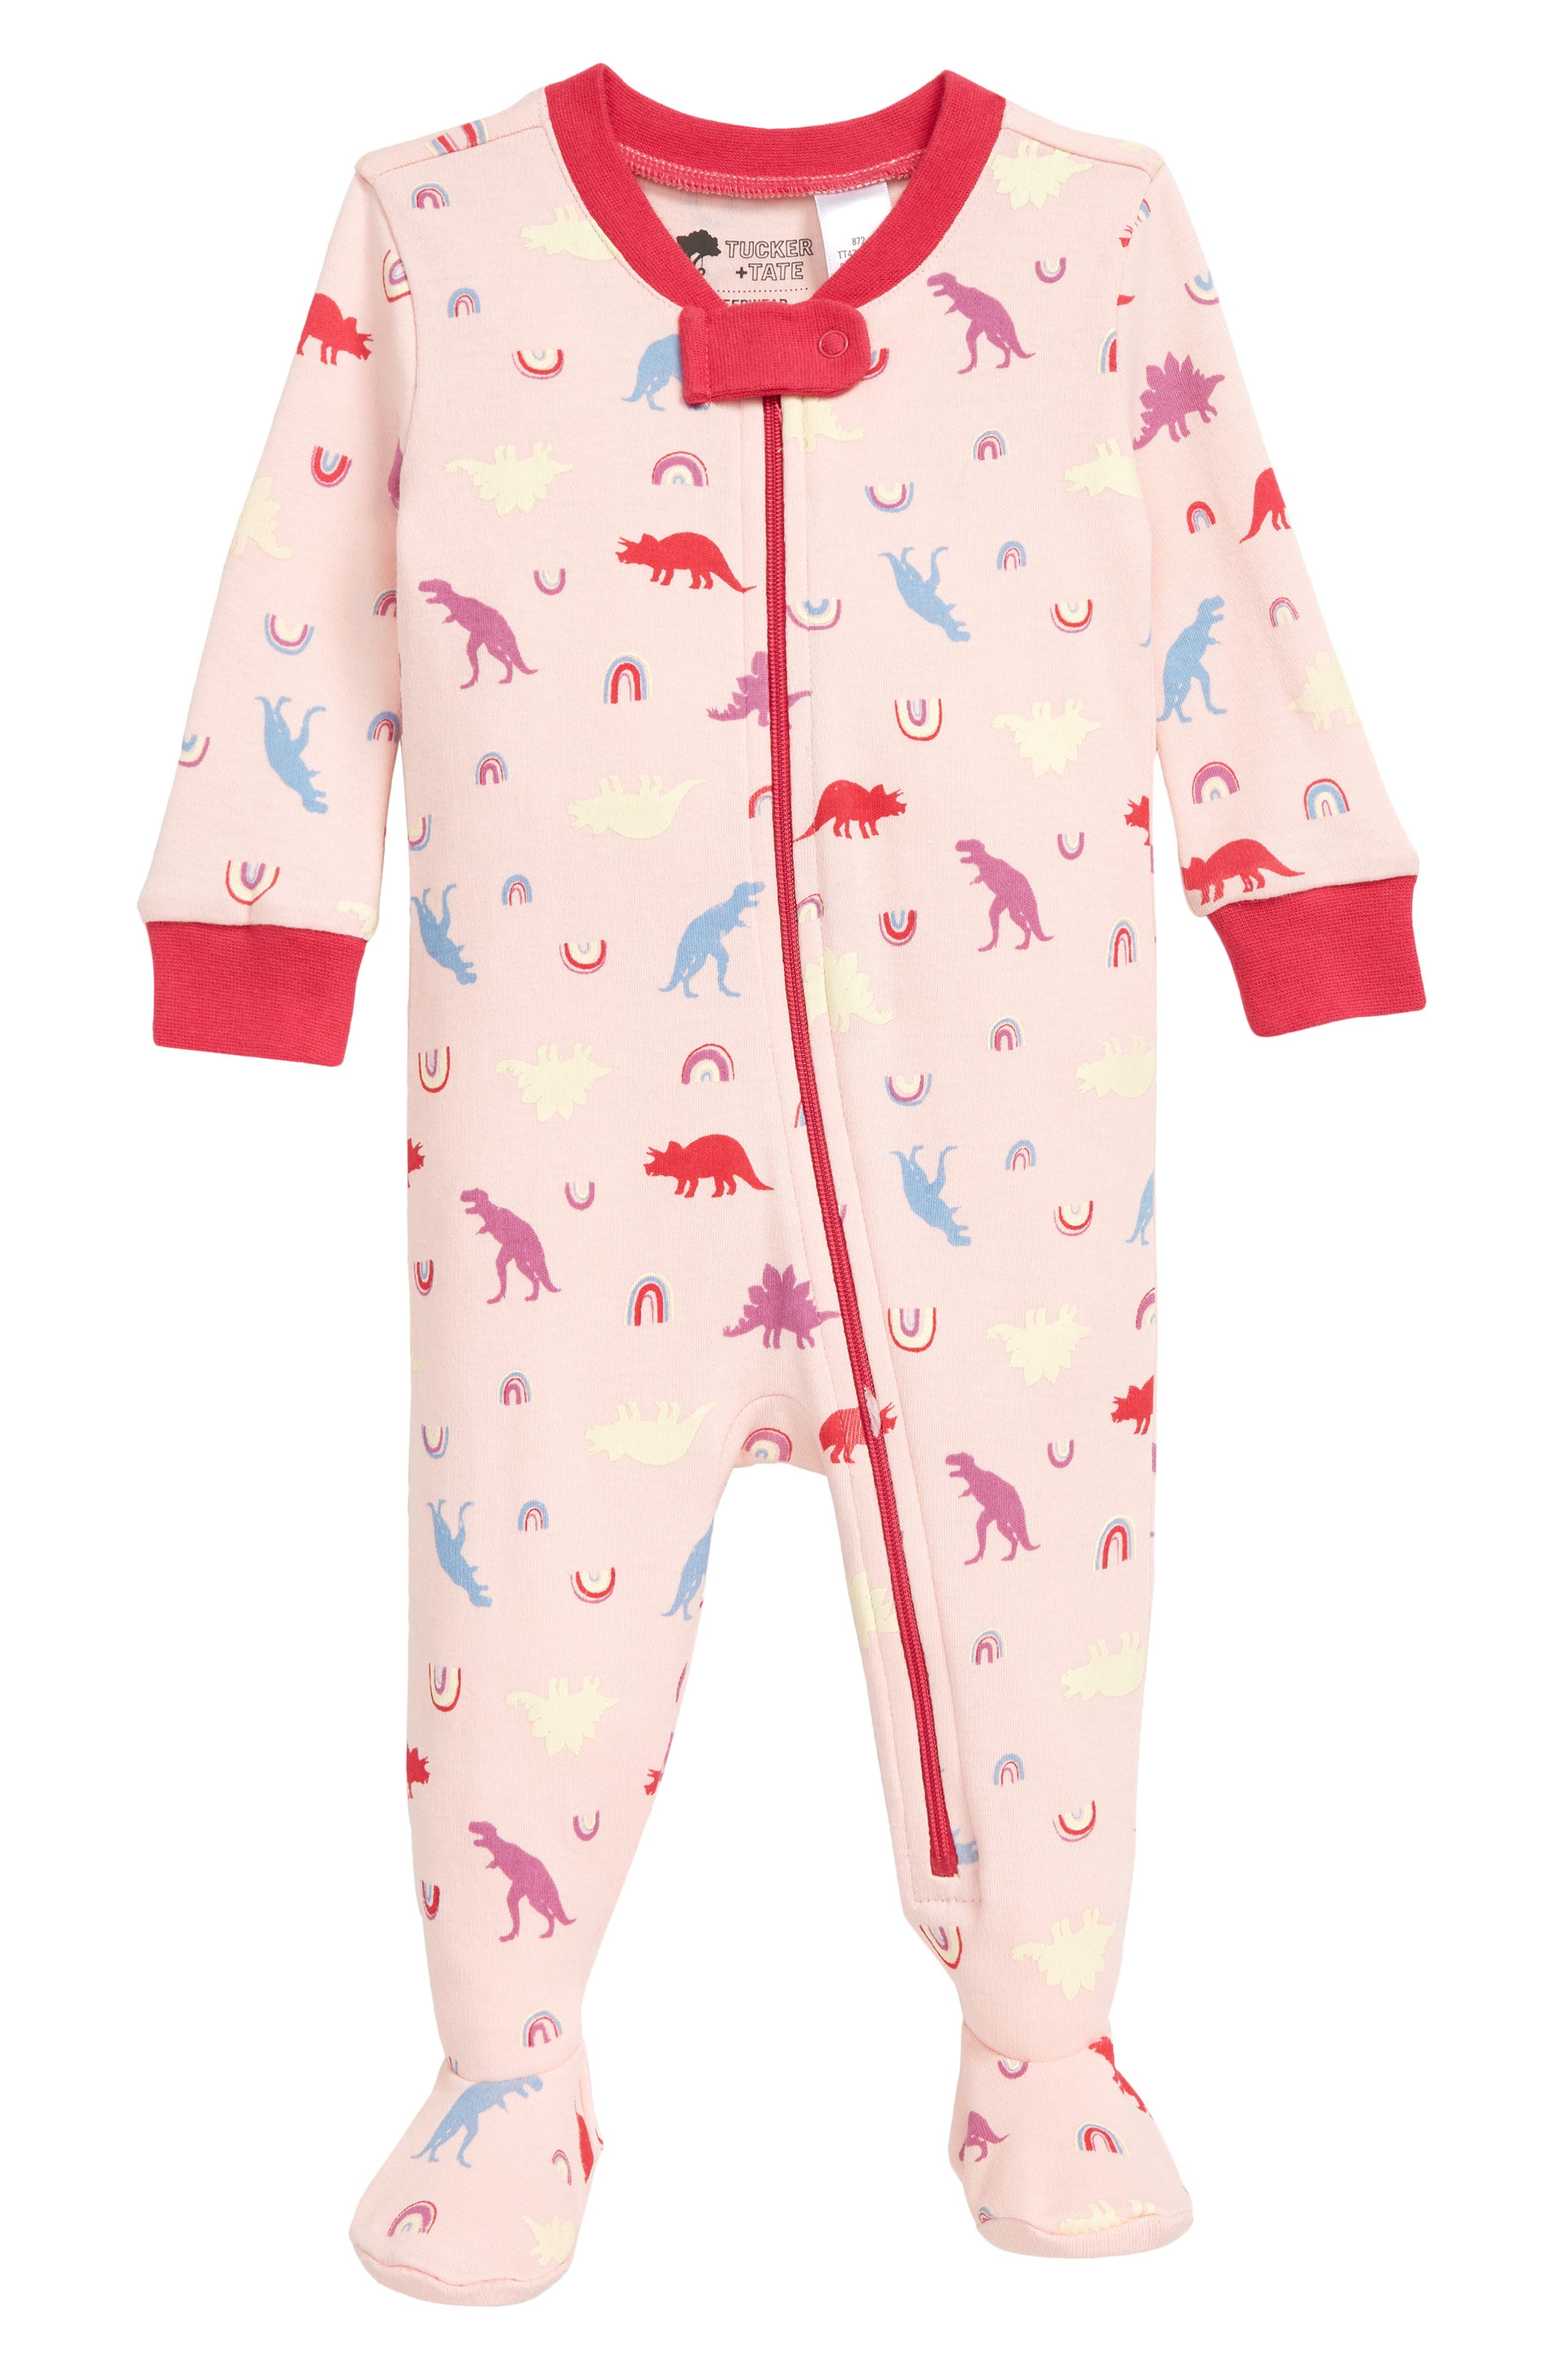 Nordstrom Baby Clothing Loungewear Pajamas Starflower Ruffle Fitted One-Piece Footie Pajamas & Head Wrap Set in Pink at Nordstrom 